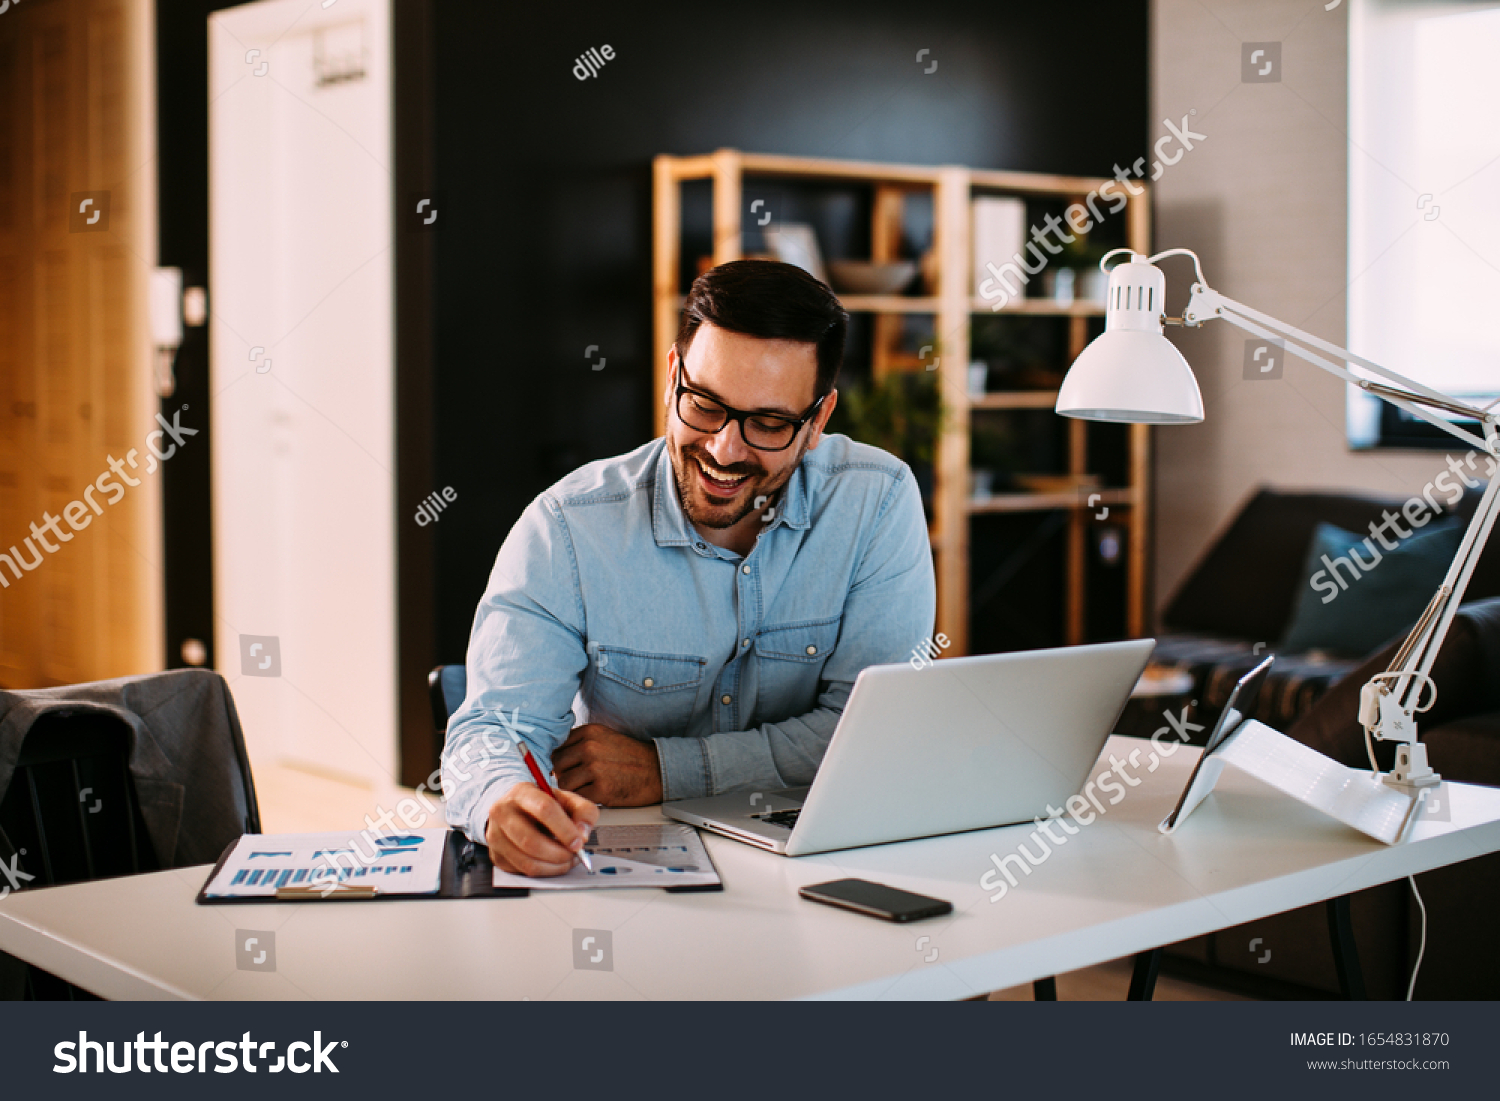 Young business man working at home with laptop and papers on desk #1654831870